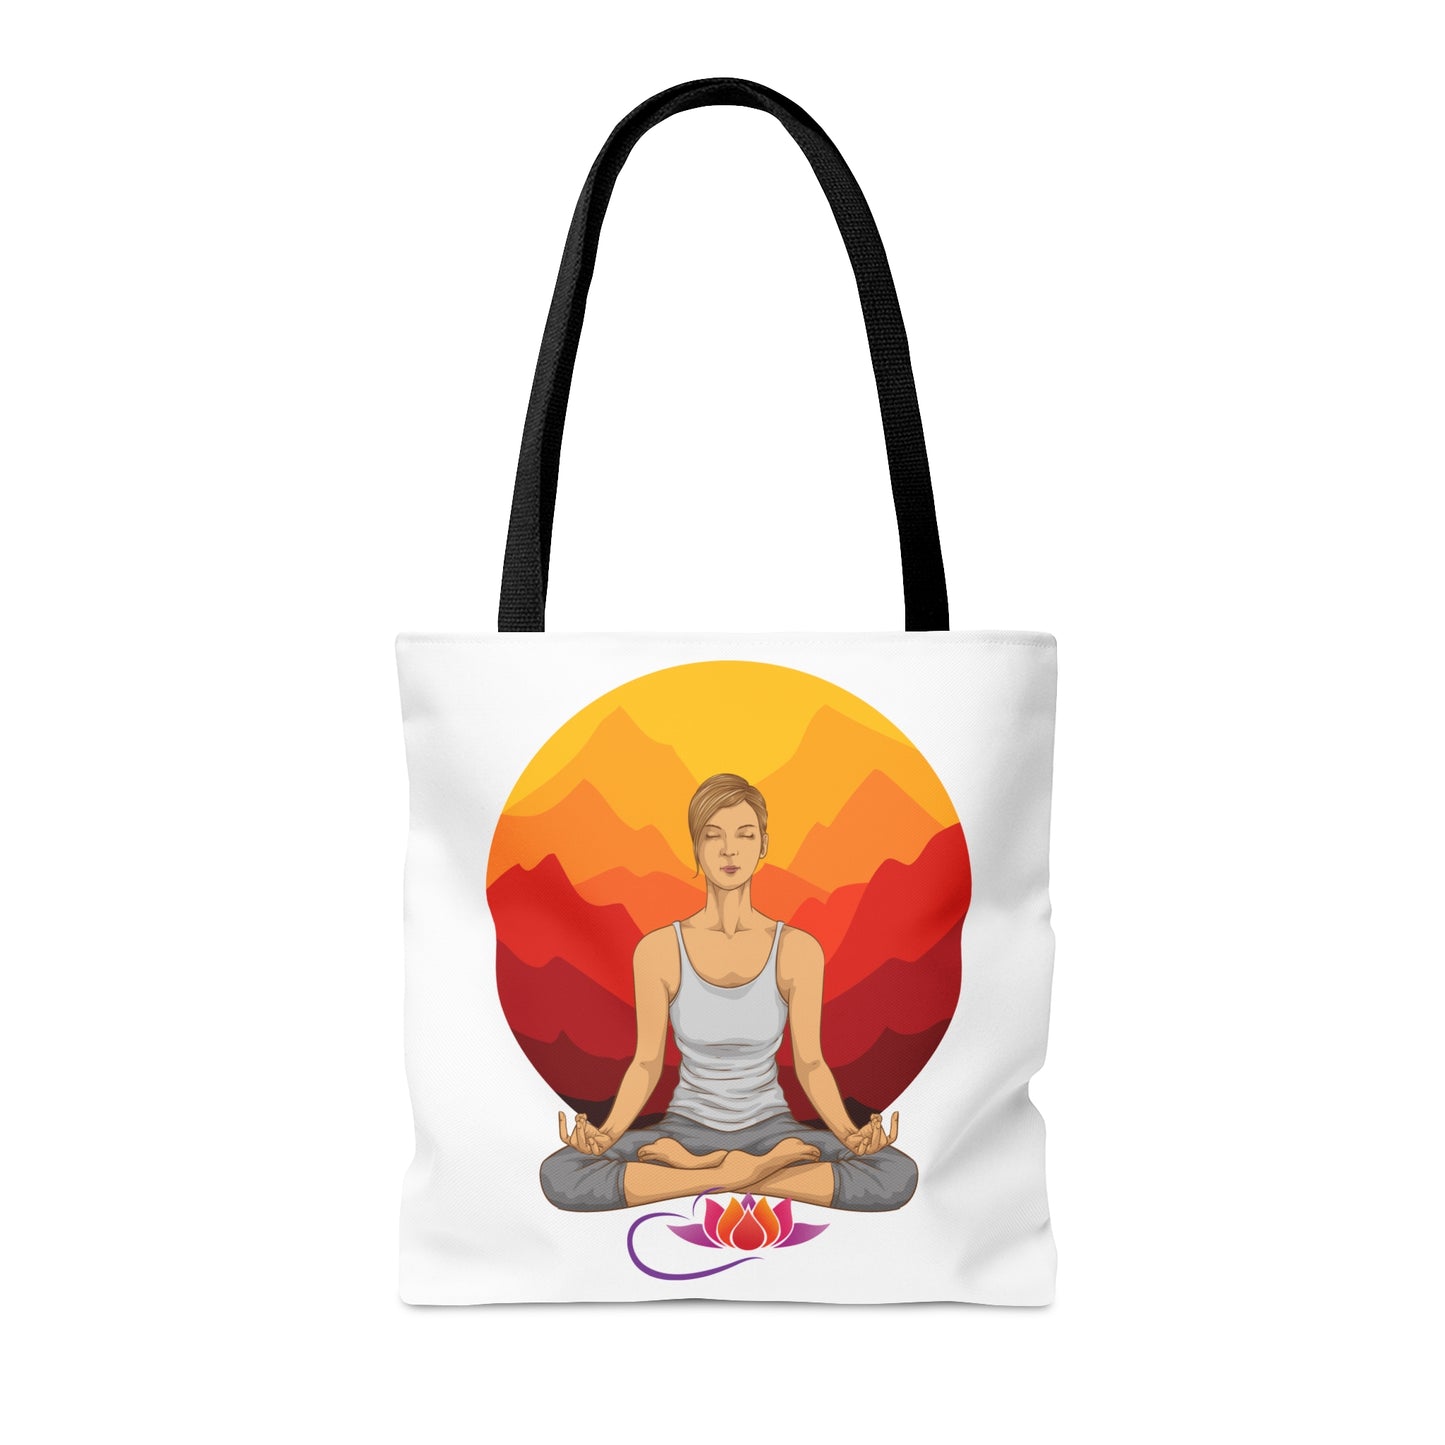 Peaceful yoga and meditation inspired tote bag. Come in 3 sizes to meet your needs. Reusable for all your shopping or trip needs.